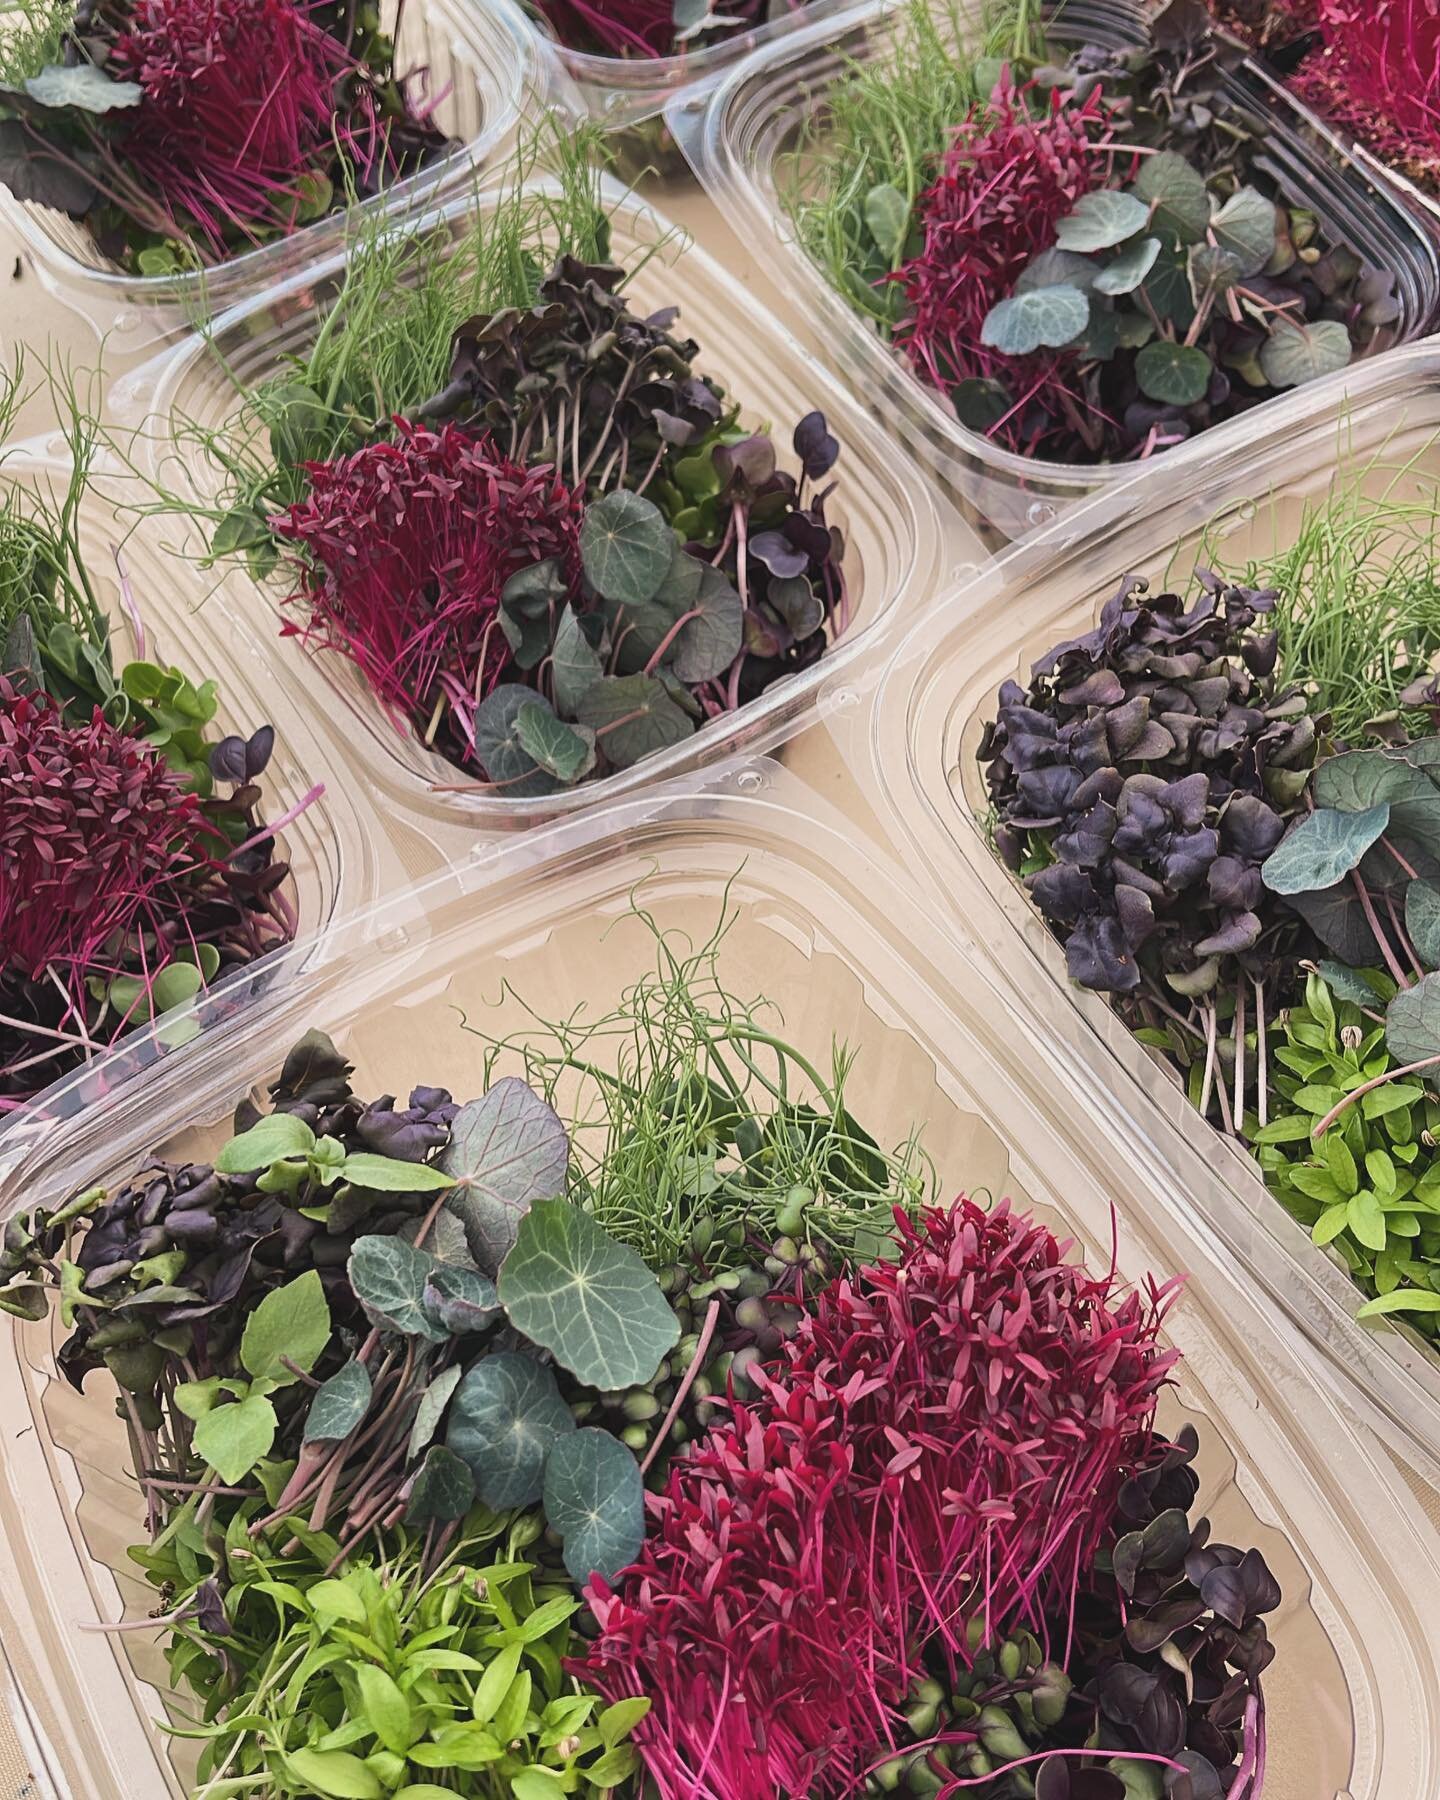 If you&rsquo;ve gotten microgreens from us at the markets you may not have known our packaging is fully compostable from @goodstartpackaging  #microgreens #sustainability #superfood #freshgreens